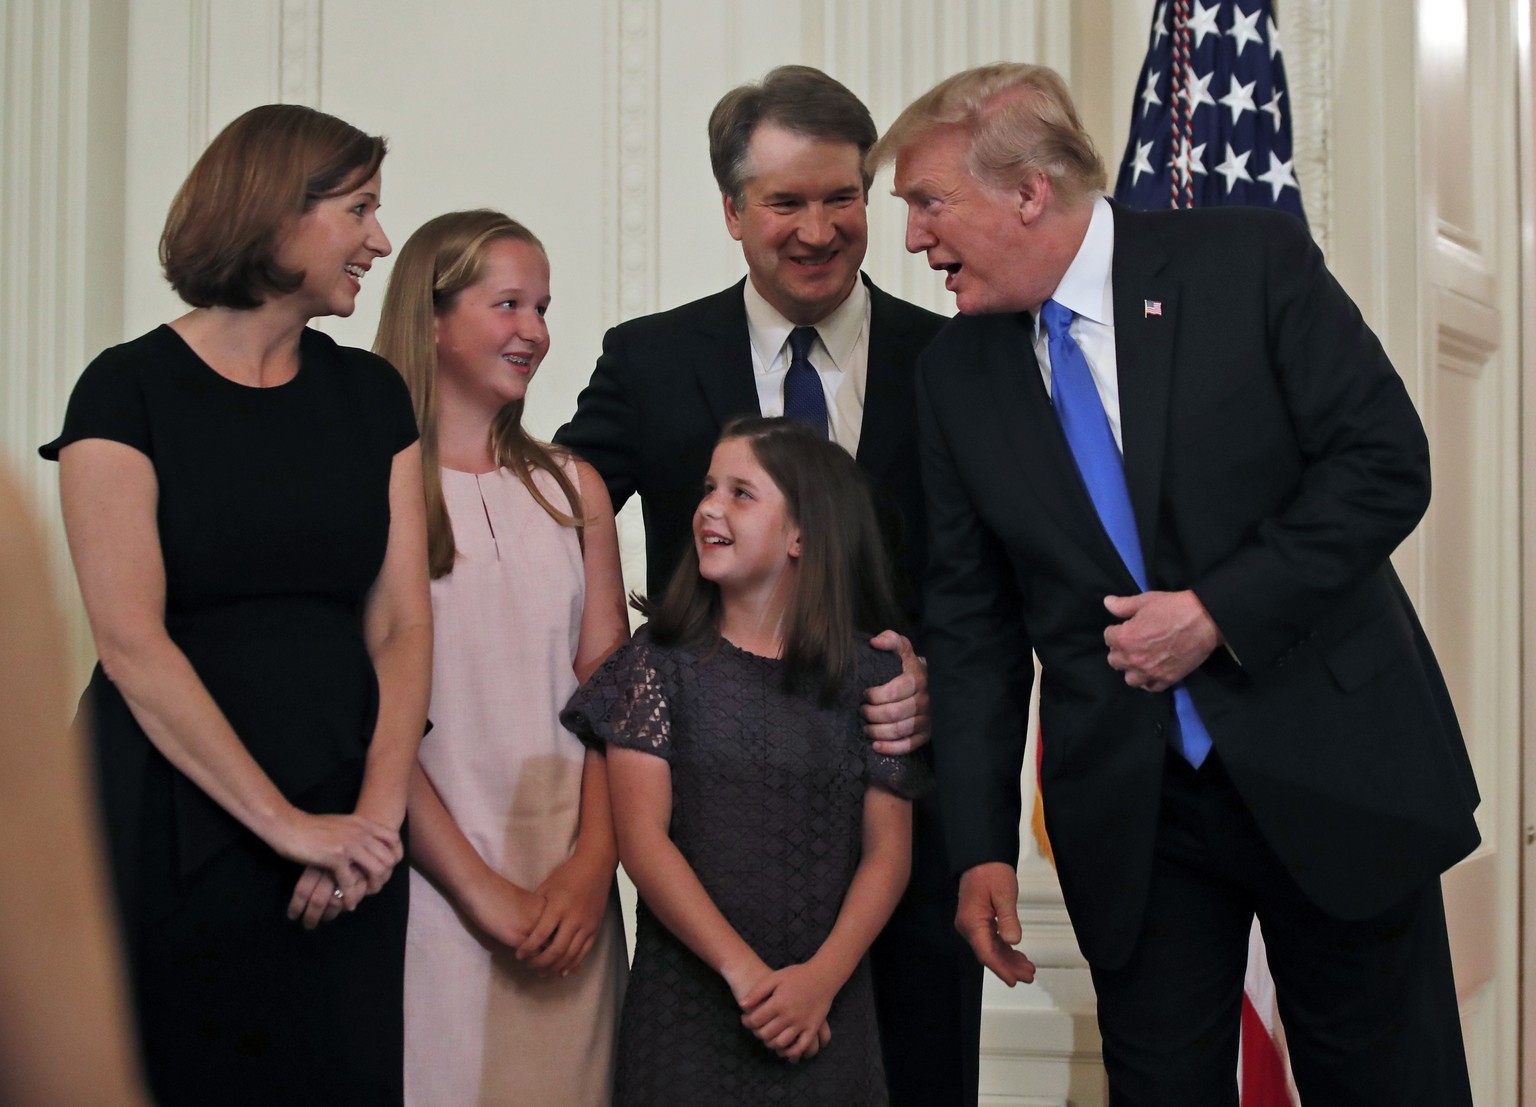 President Donald Trump talks with Judge Brett Kavanaugh his Supreme Court nominee, and his family in the East Room of the White House, Monday, July 9, 2018, in Washington. (AP Photo/Alex Brandon)